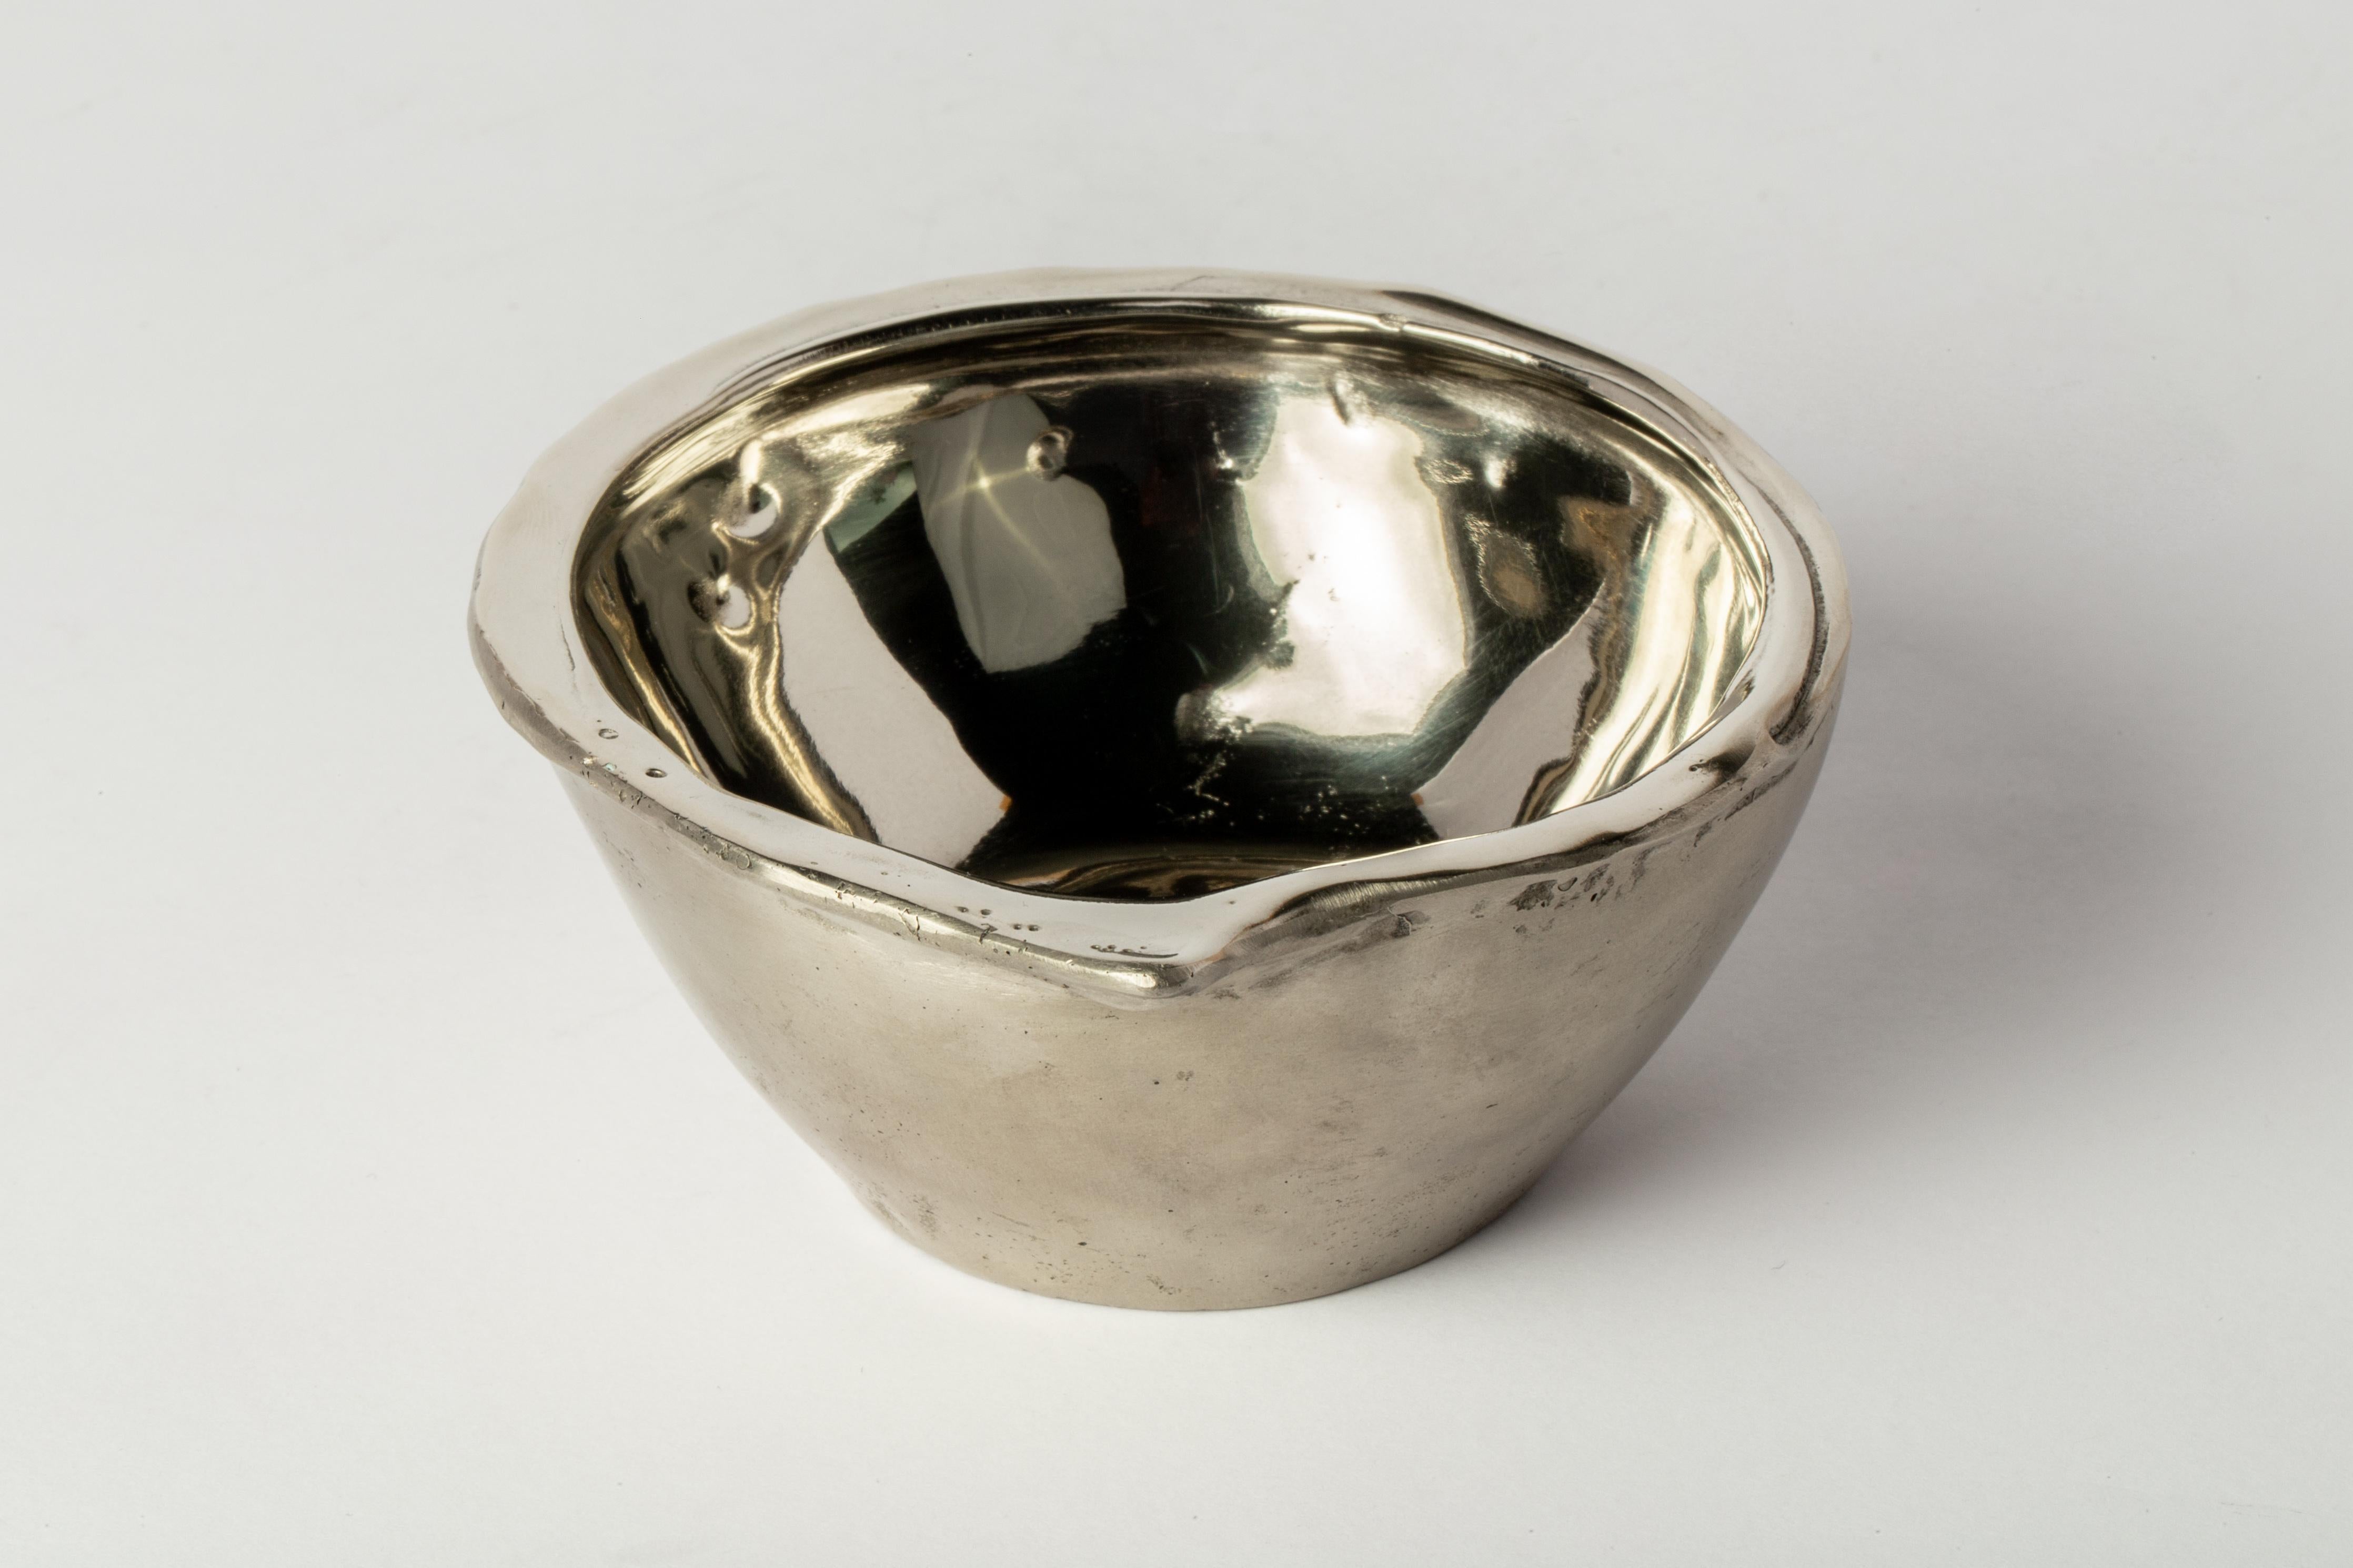 Small bowl in white bronze, polished to a brilliant shine on the inside, is a captivating blend of elegance and craftsmanship. Its sleek, reflective interior surface exudes a timeless and sophisticated charm, making it a stunning addition to your